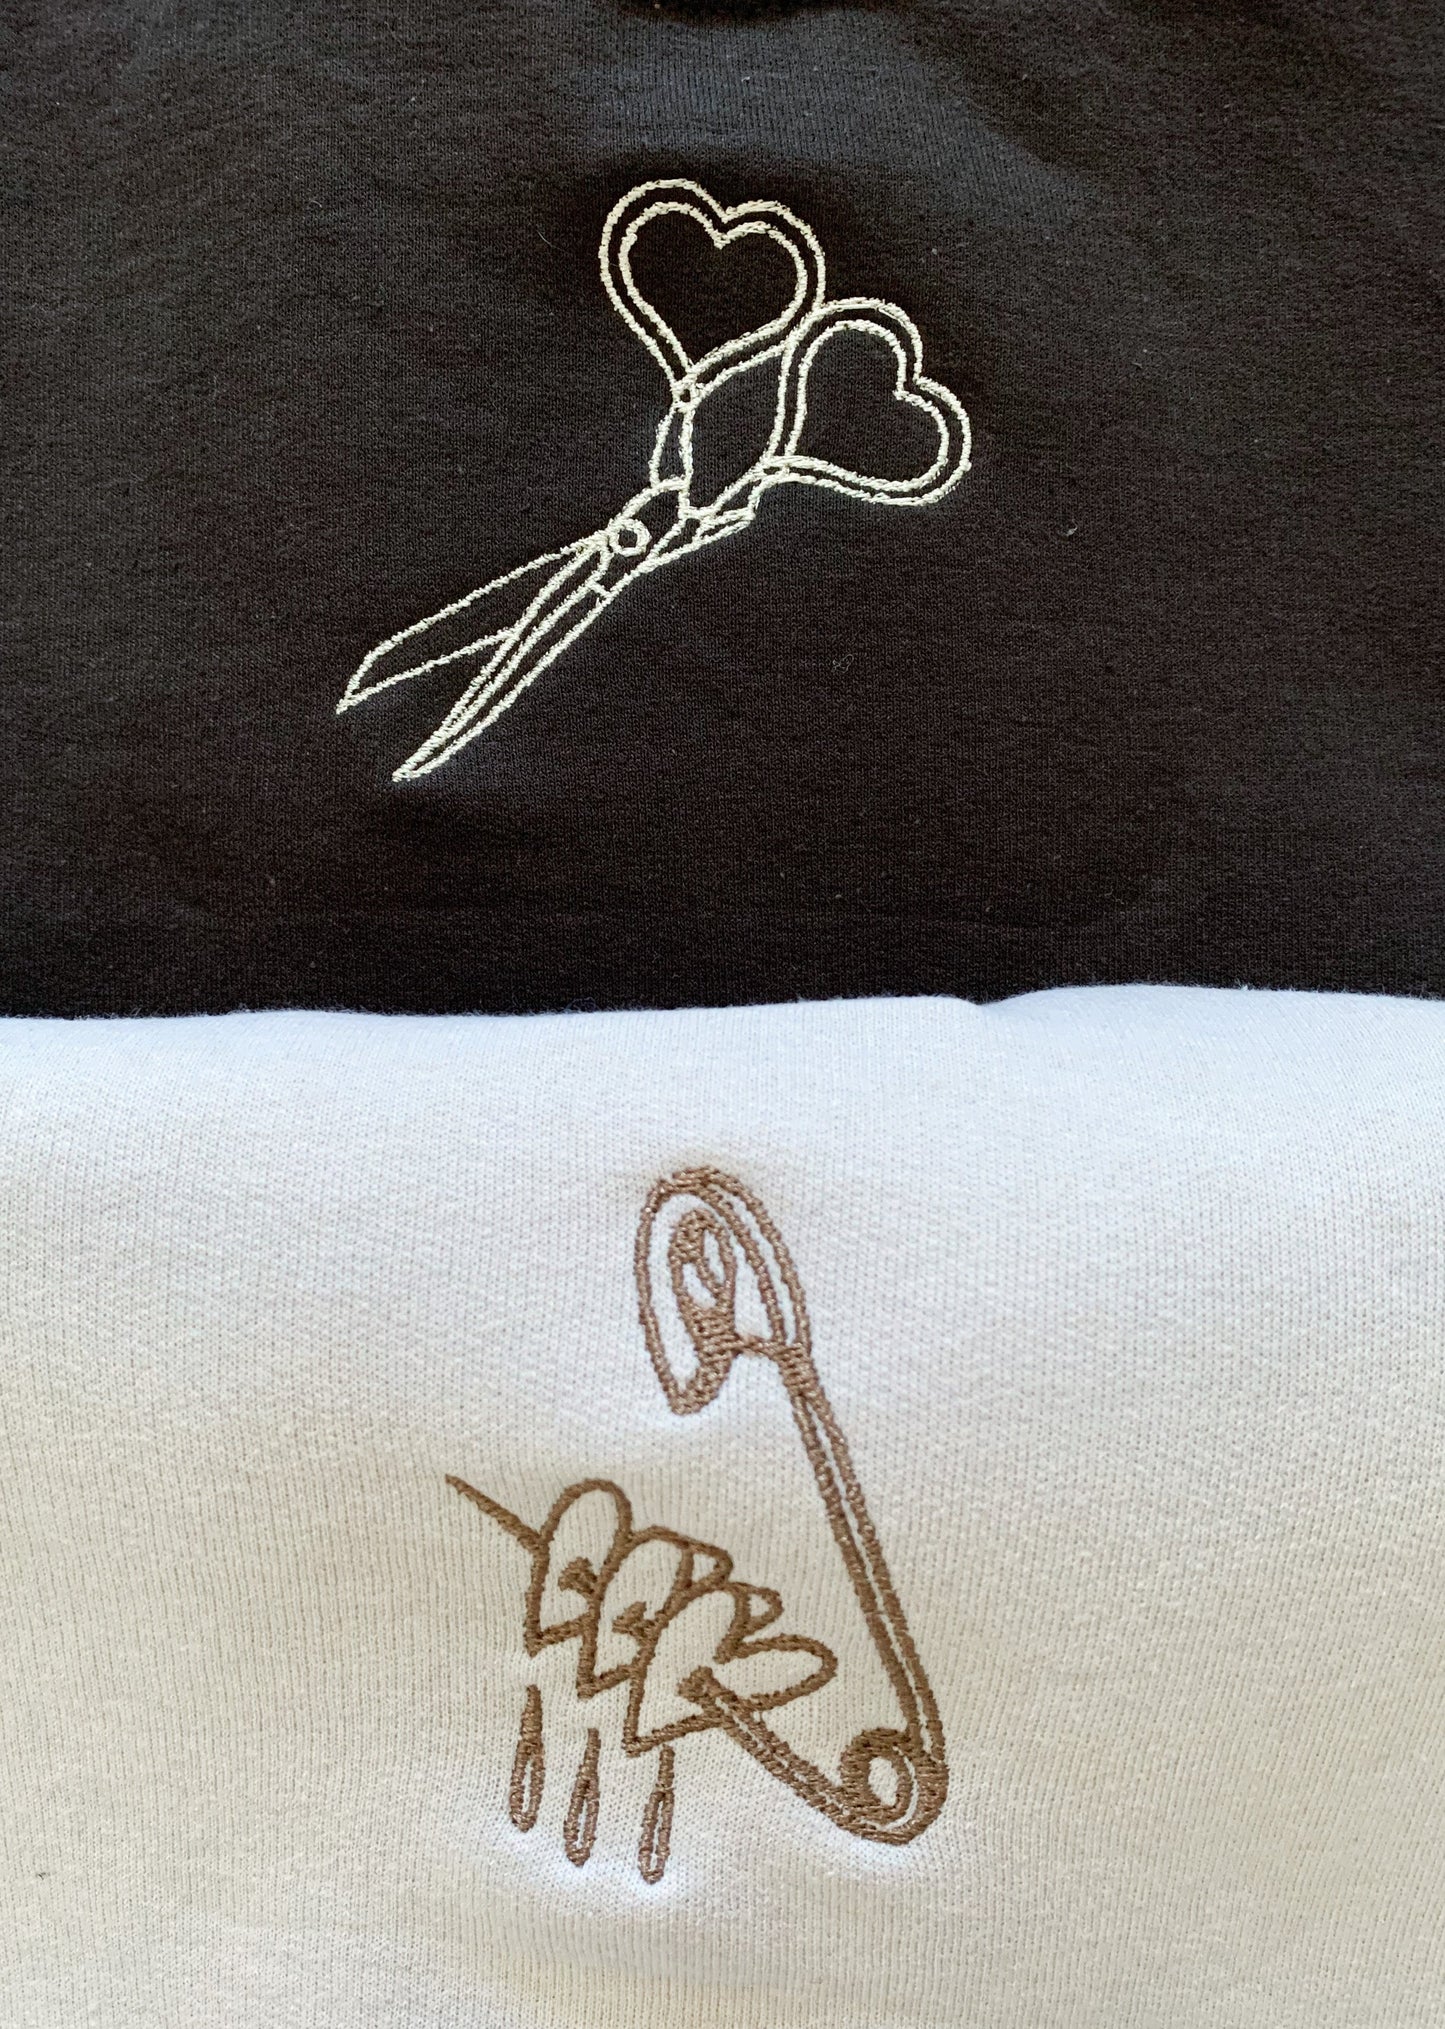 Scissor and Safety Pin Embroidered Set